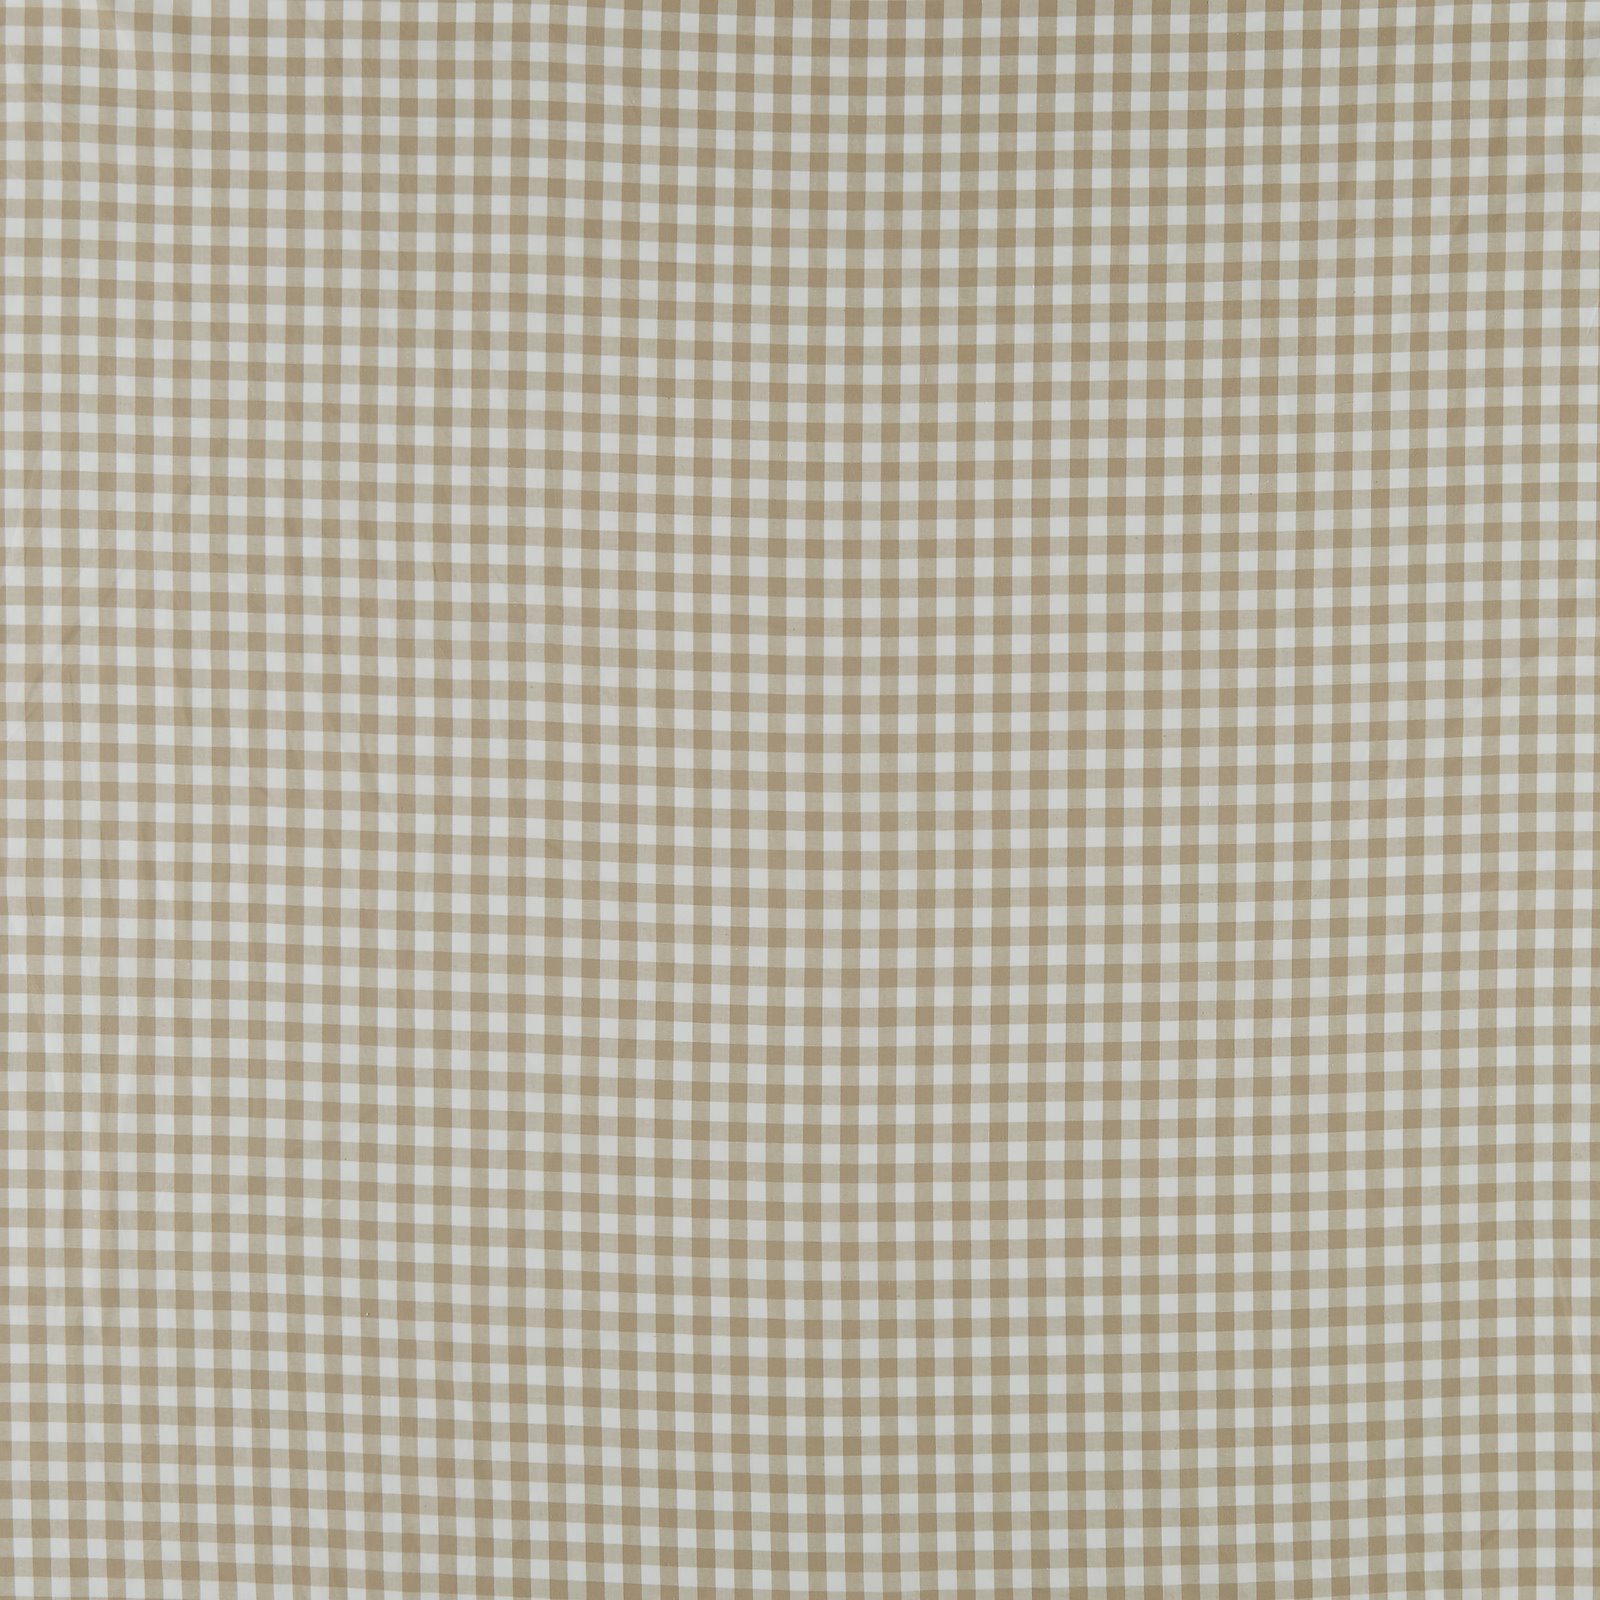 Cotton yarn dyed camel/white check 780884_pack_sp